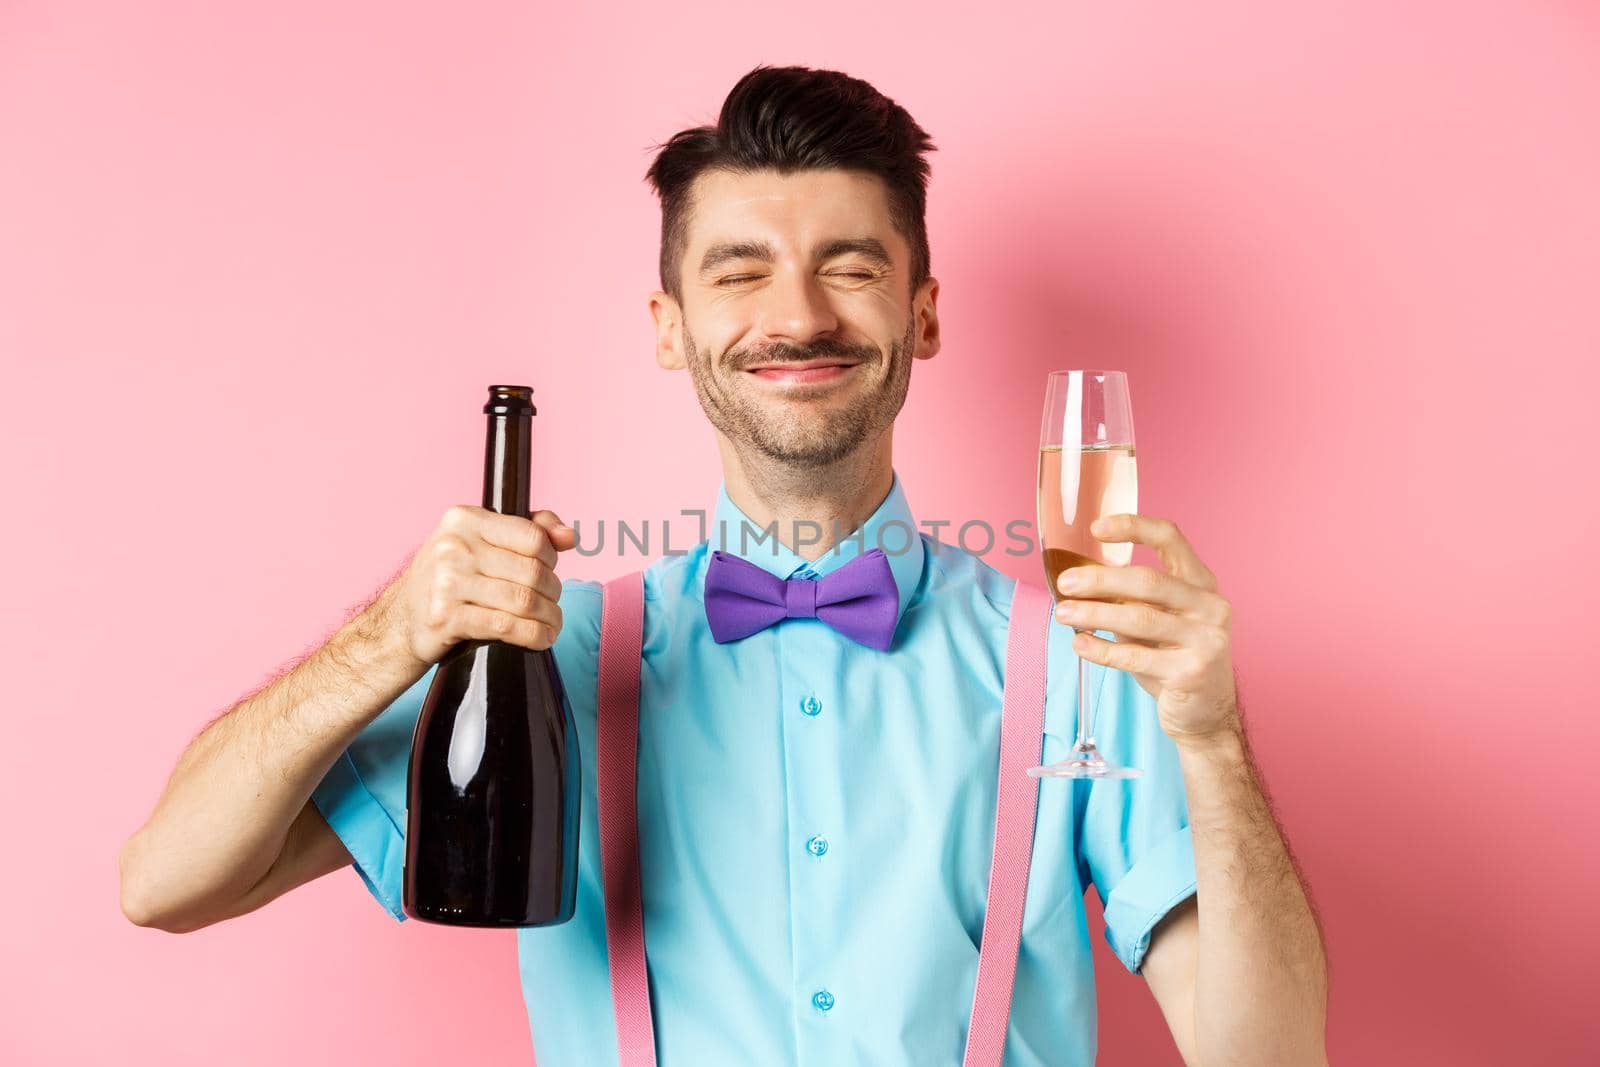 Holidays and celebration concept. Happy man smiling and enjoying drinking at party, holding bottle of champagne and glass, standing over pink background.